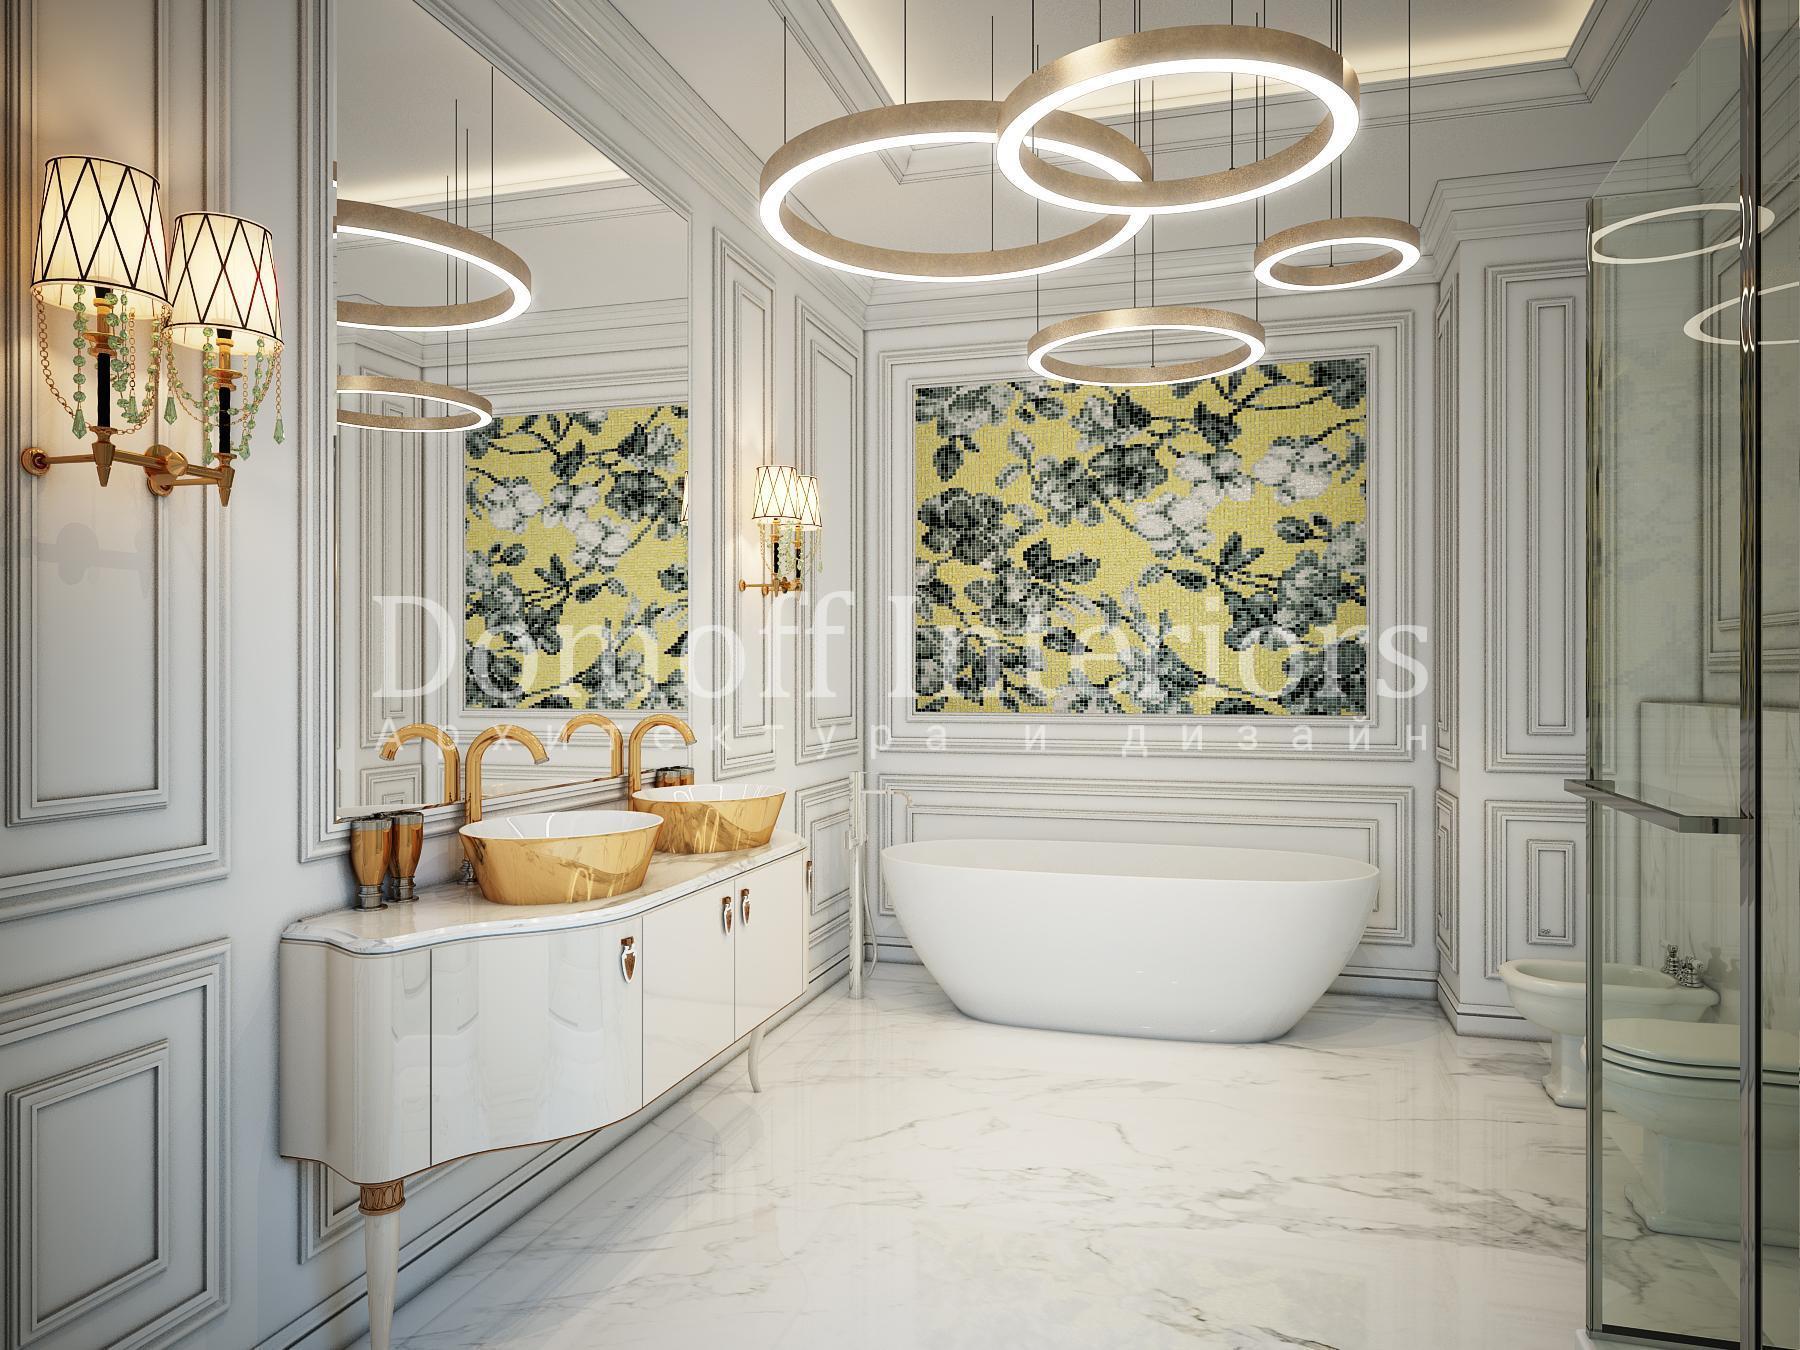 Guest bedroom's bathroom made in the style of Contemporary classics